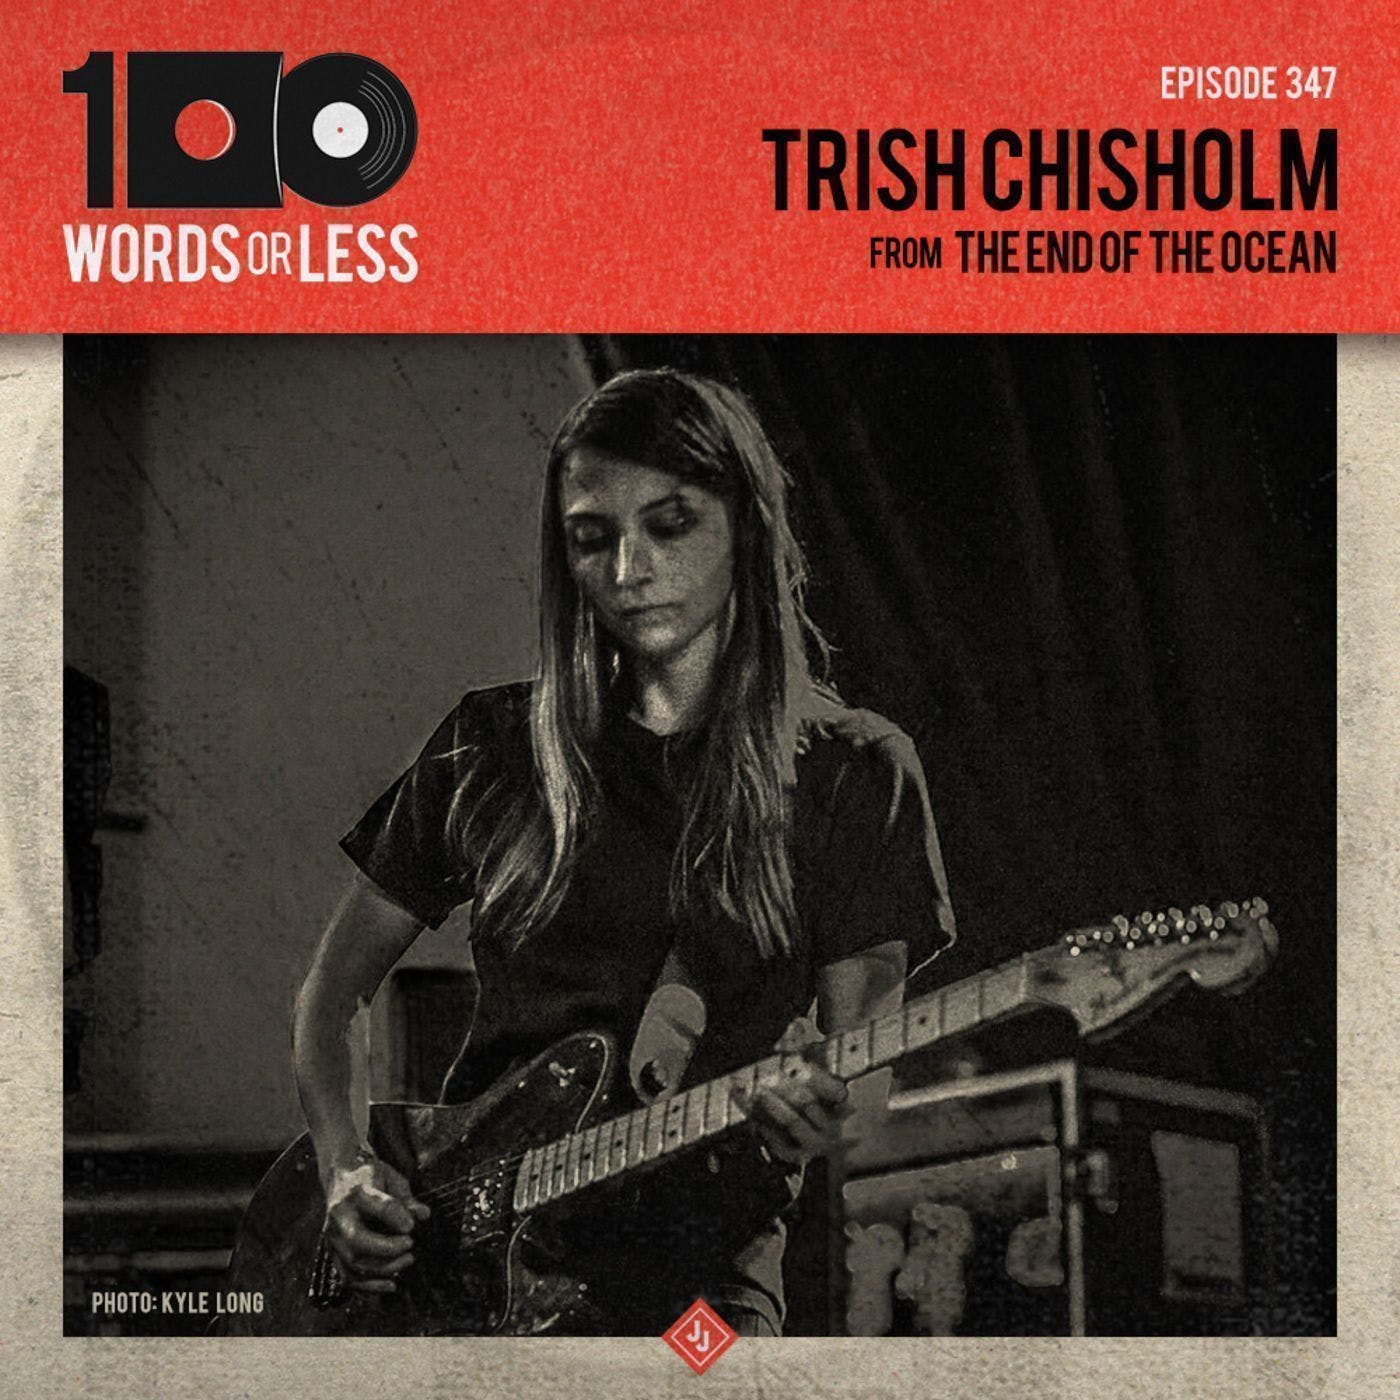 Trish Chisholm from The End of the Ocean